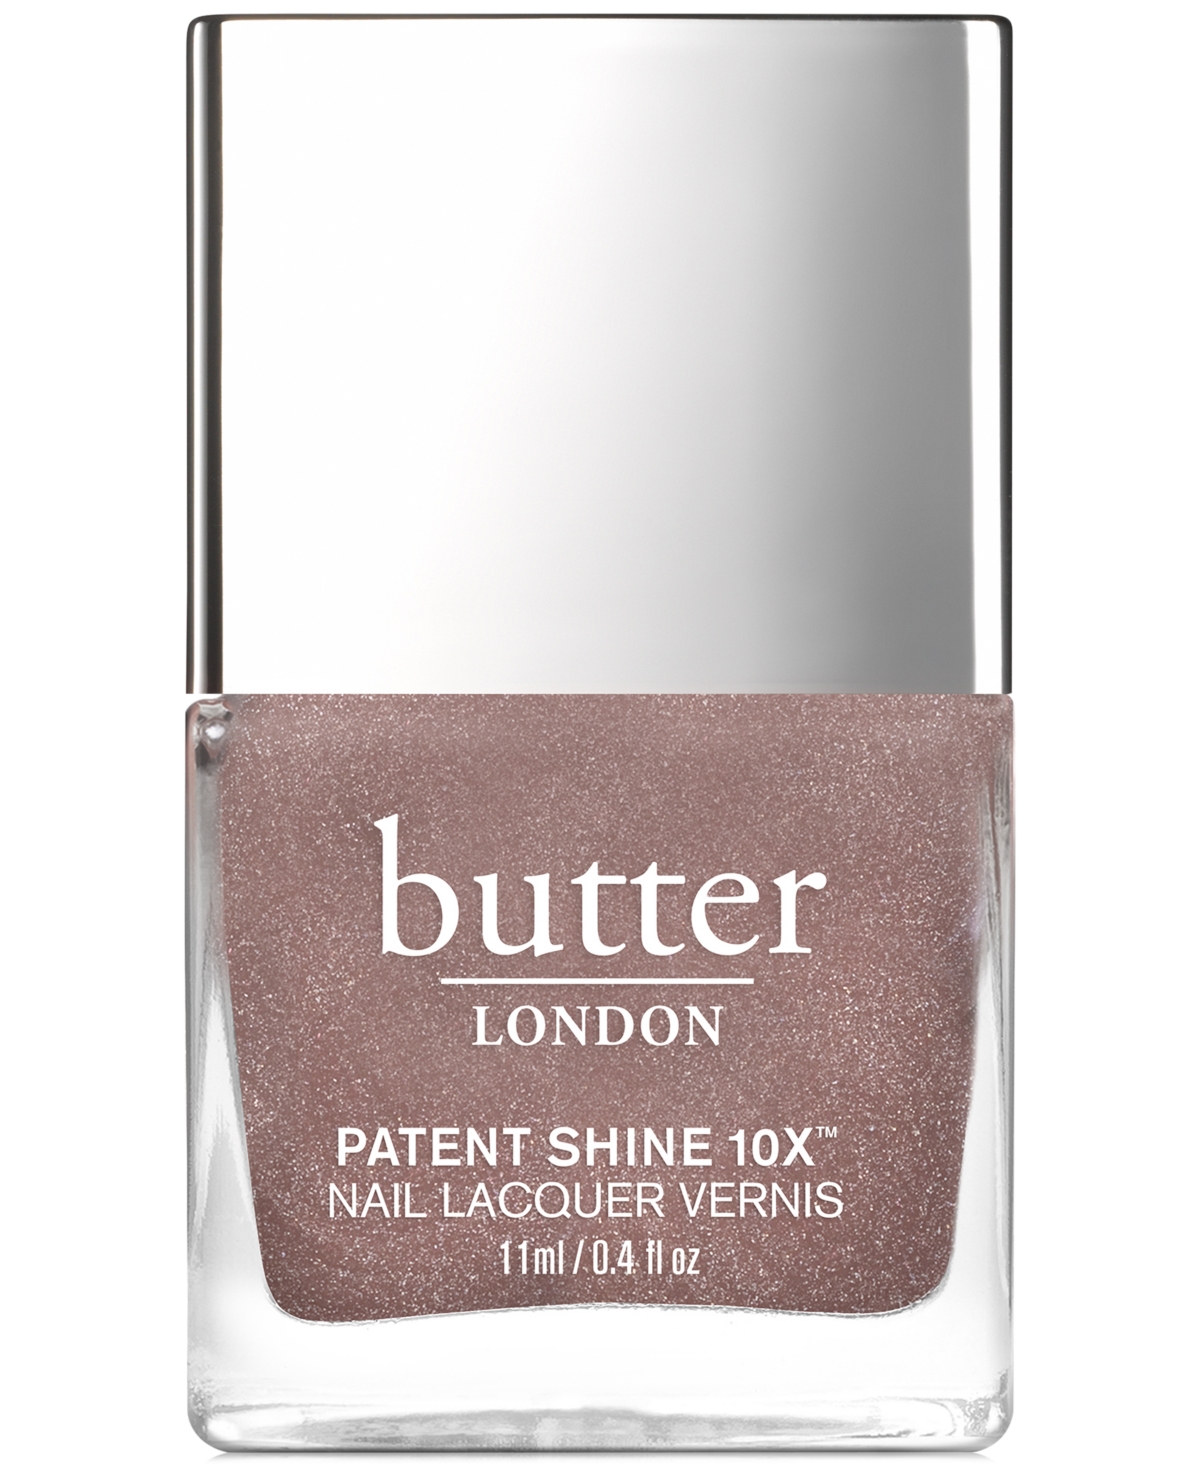 butter London Patent Shine 10X Nail Lacquer